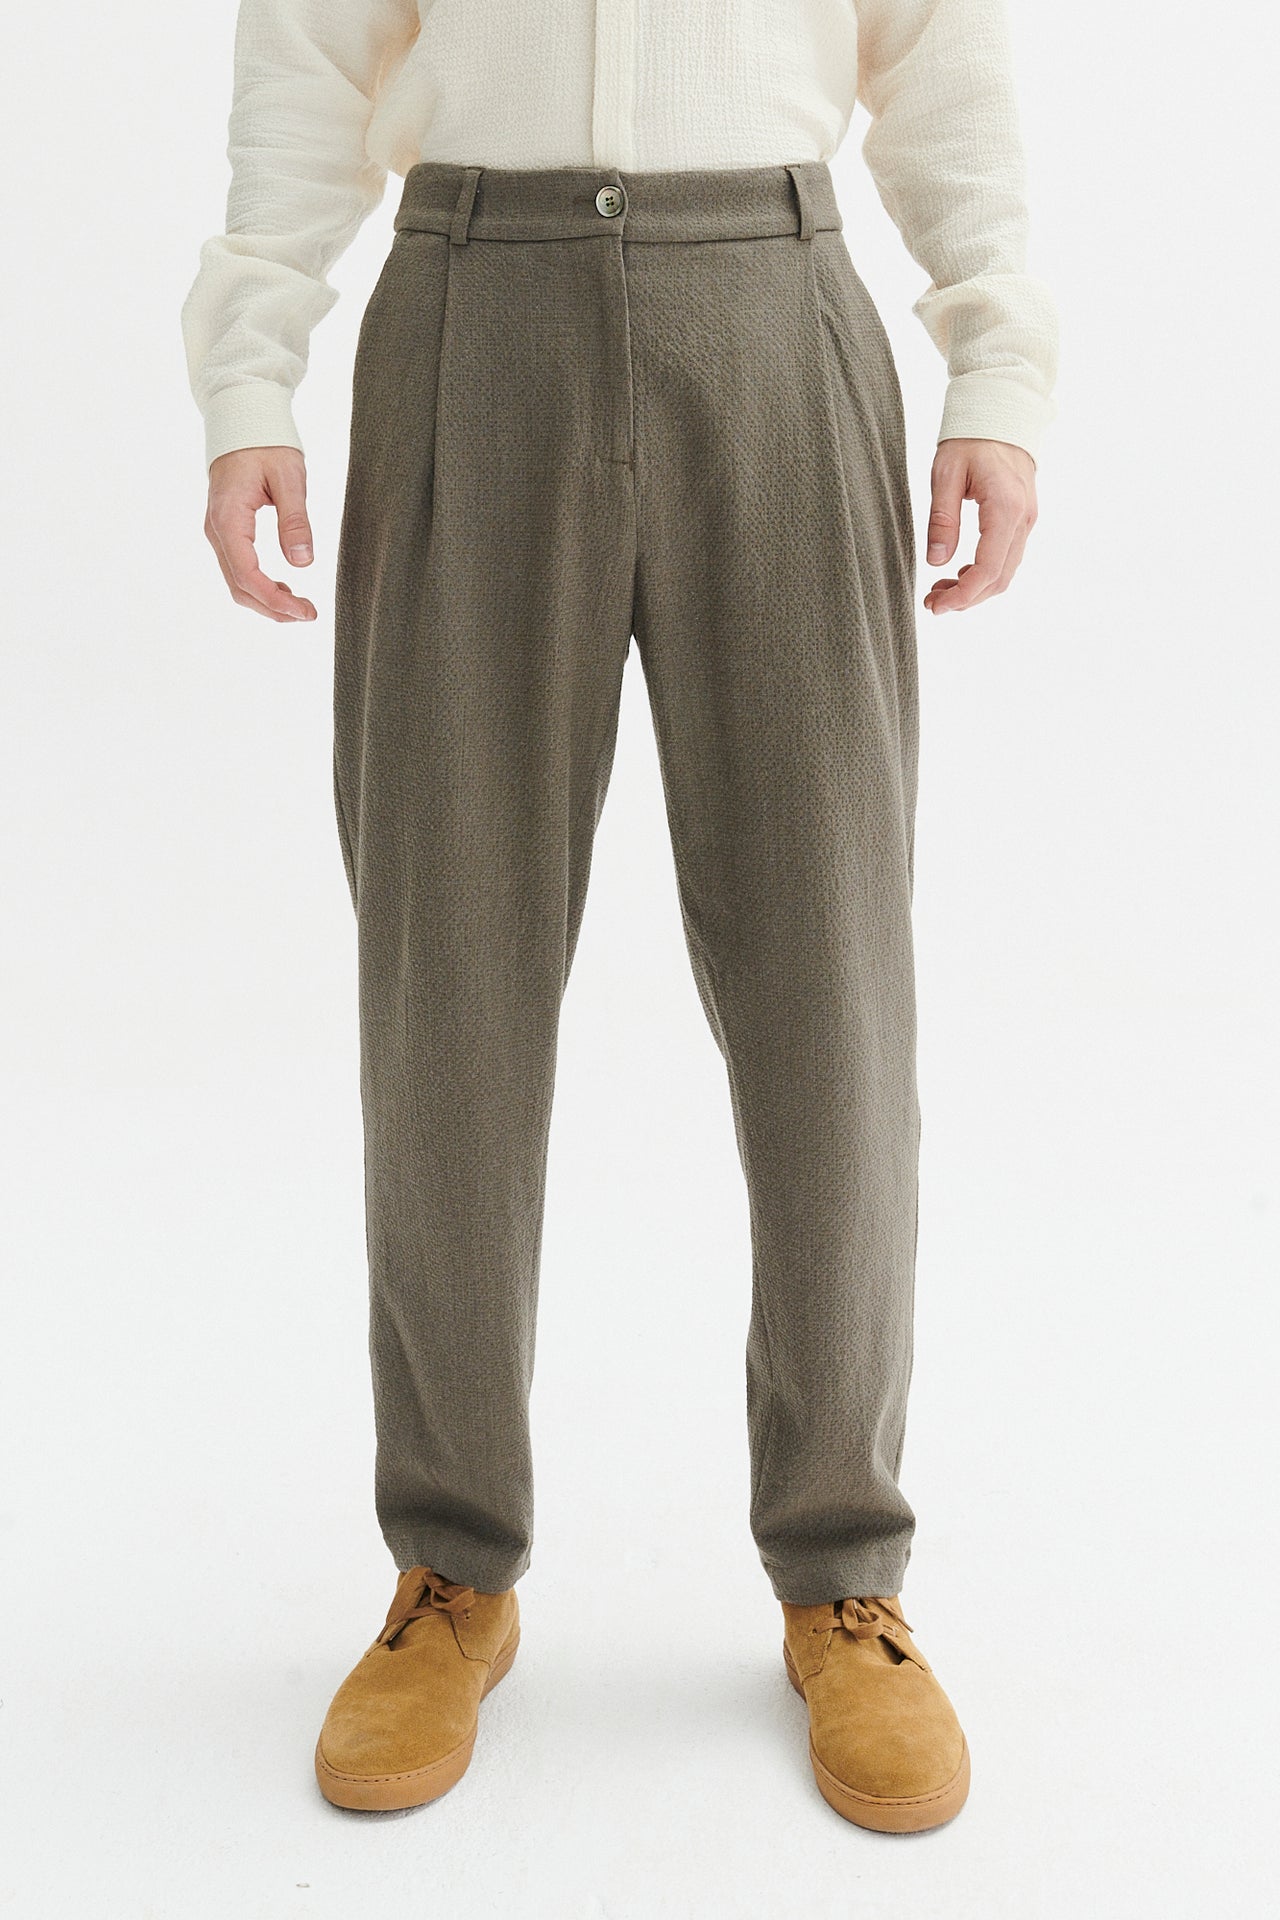 Genuine Trousers in a Taupe Italian Virgin Wool and Cotton Seersucker